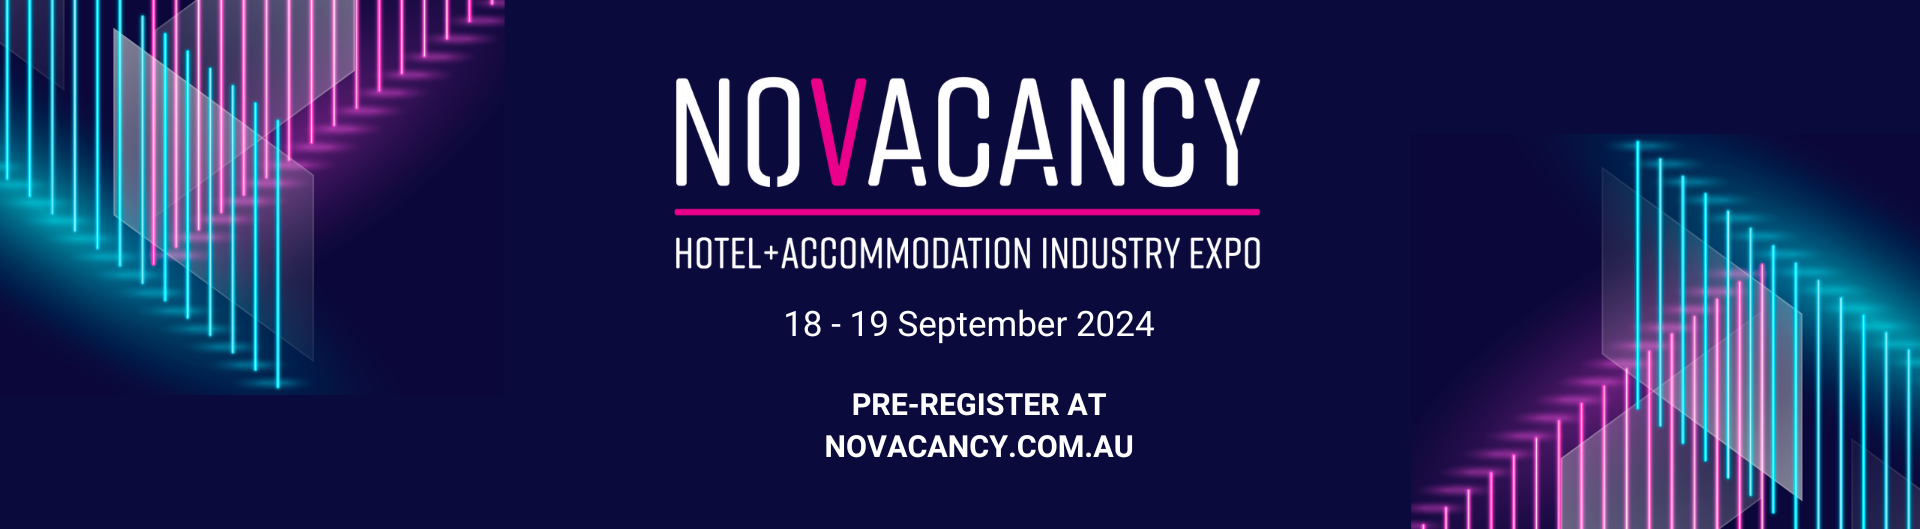 Event listing featured banner for NoVacancy which is making its way to ICC Sydney on 18 to 19 September 2024.